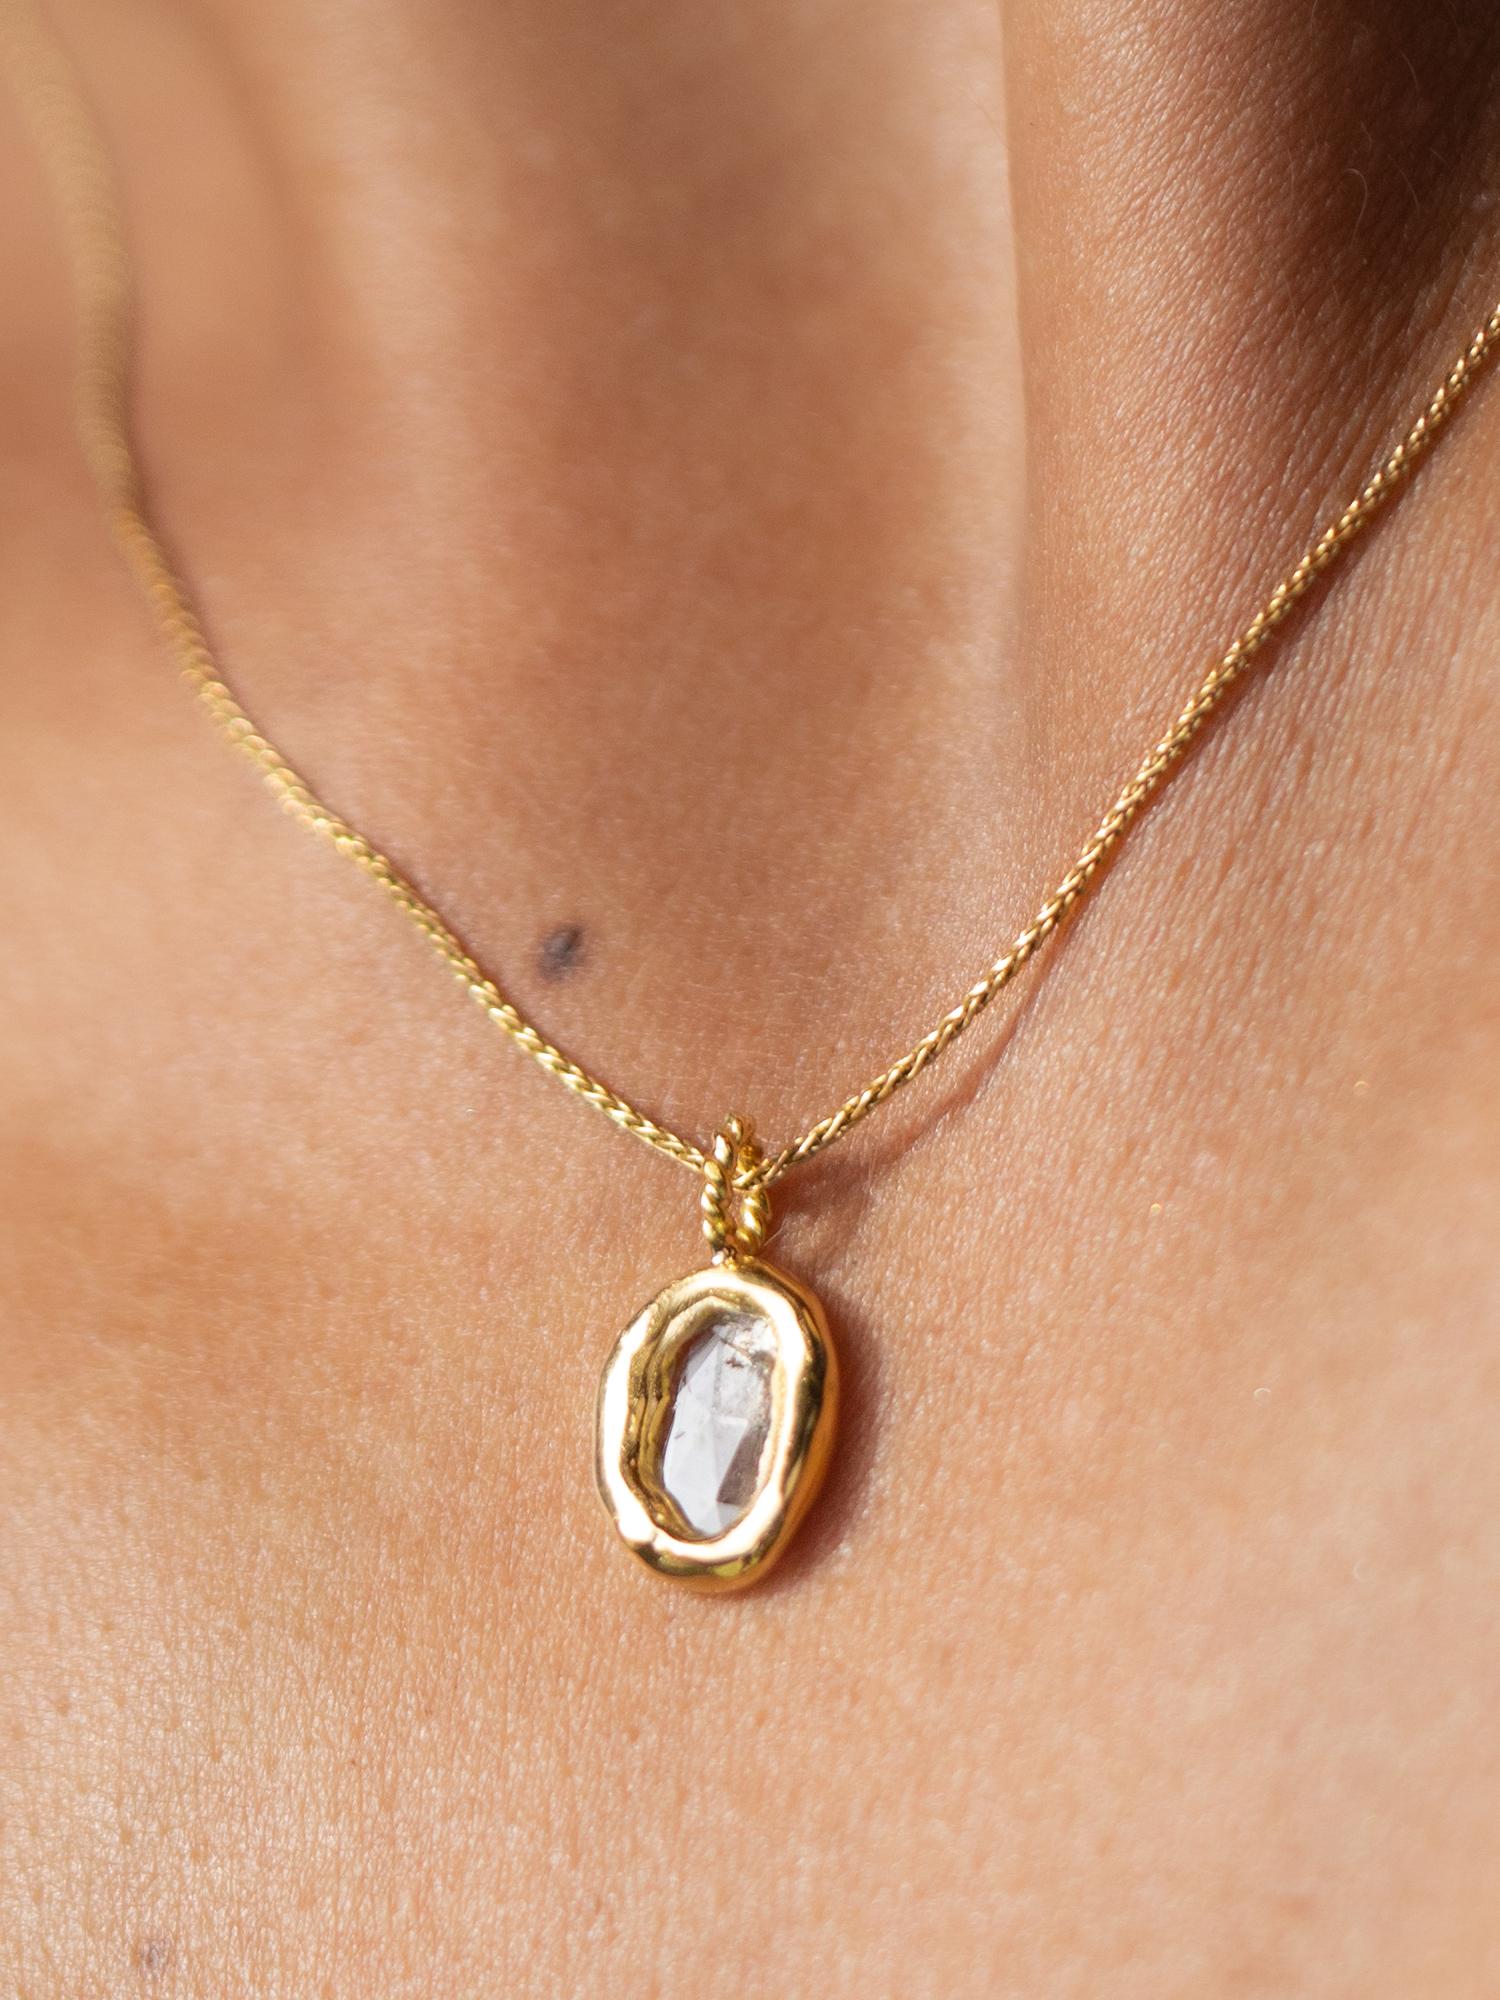 True to her name meaning “precious” the Alaine Necklace feels dainty and unassuming but is utterly eye catching in certain light. Highlighting a natural rose-cut diamond slice, this pendant hangs from a silky 14 karat vintage style wheat chain. Wear